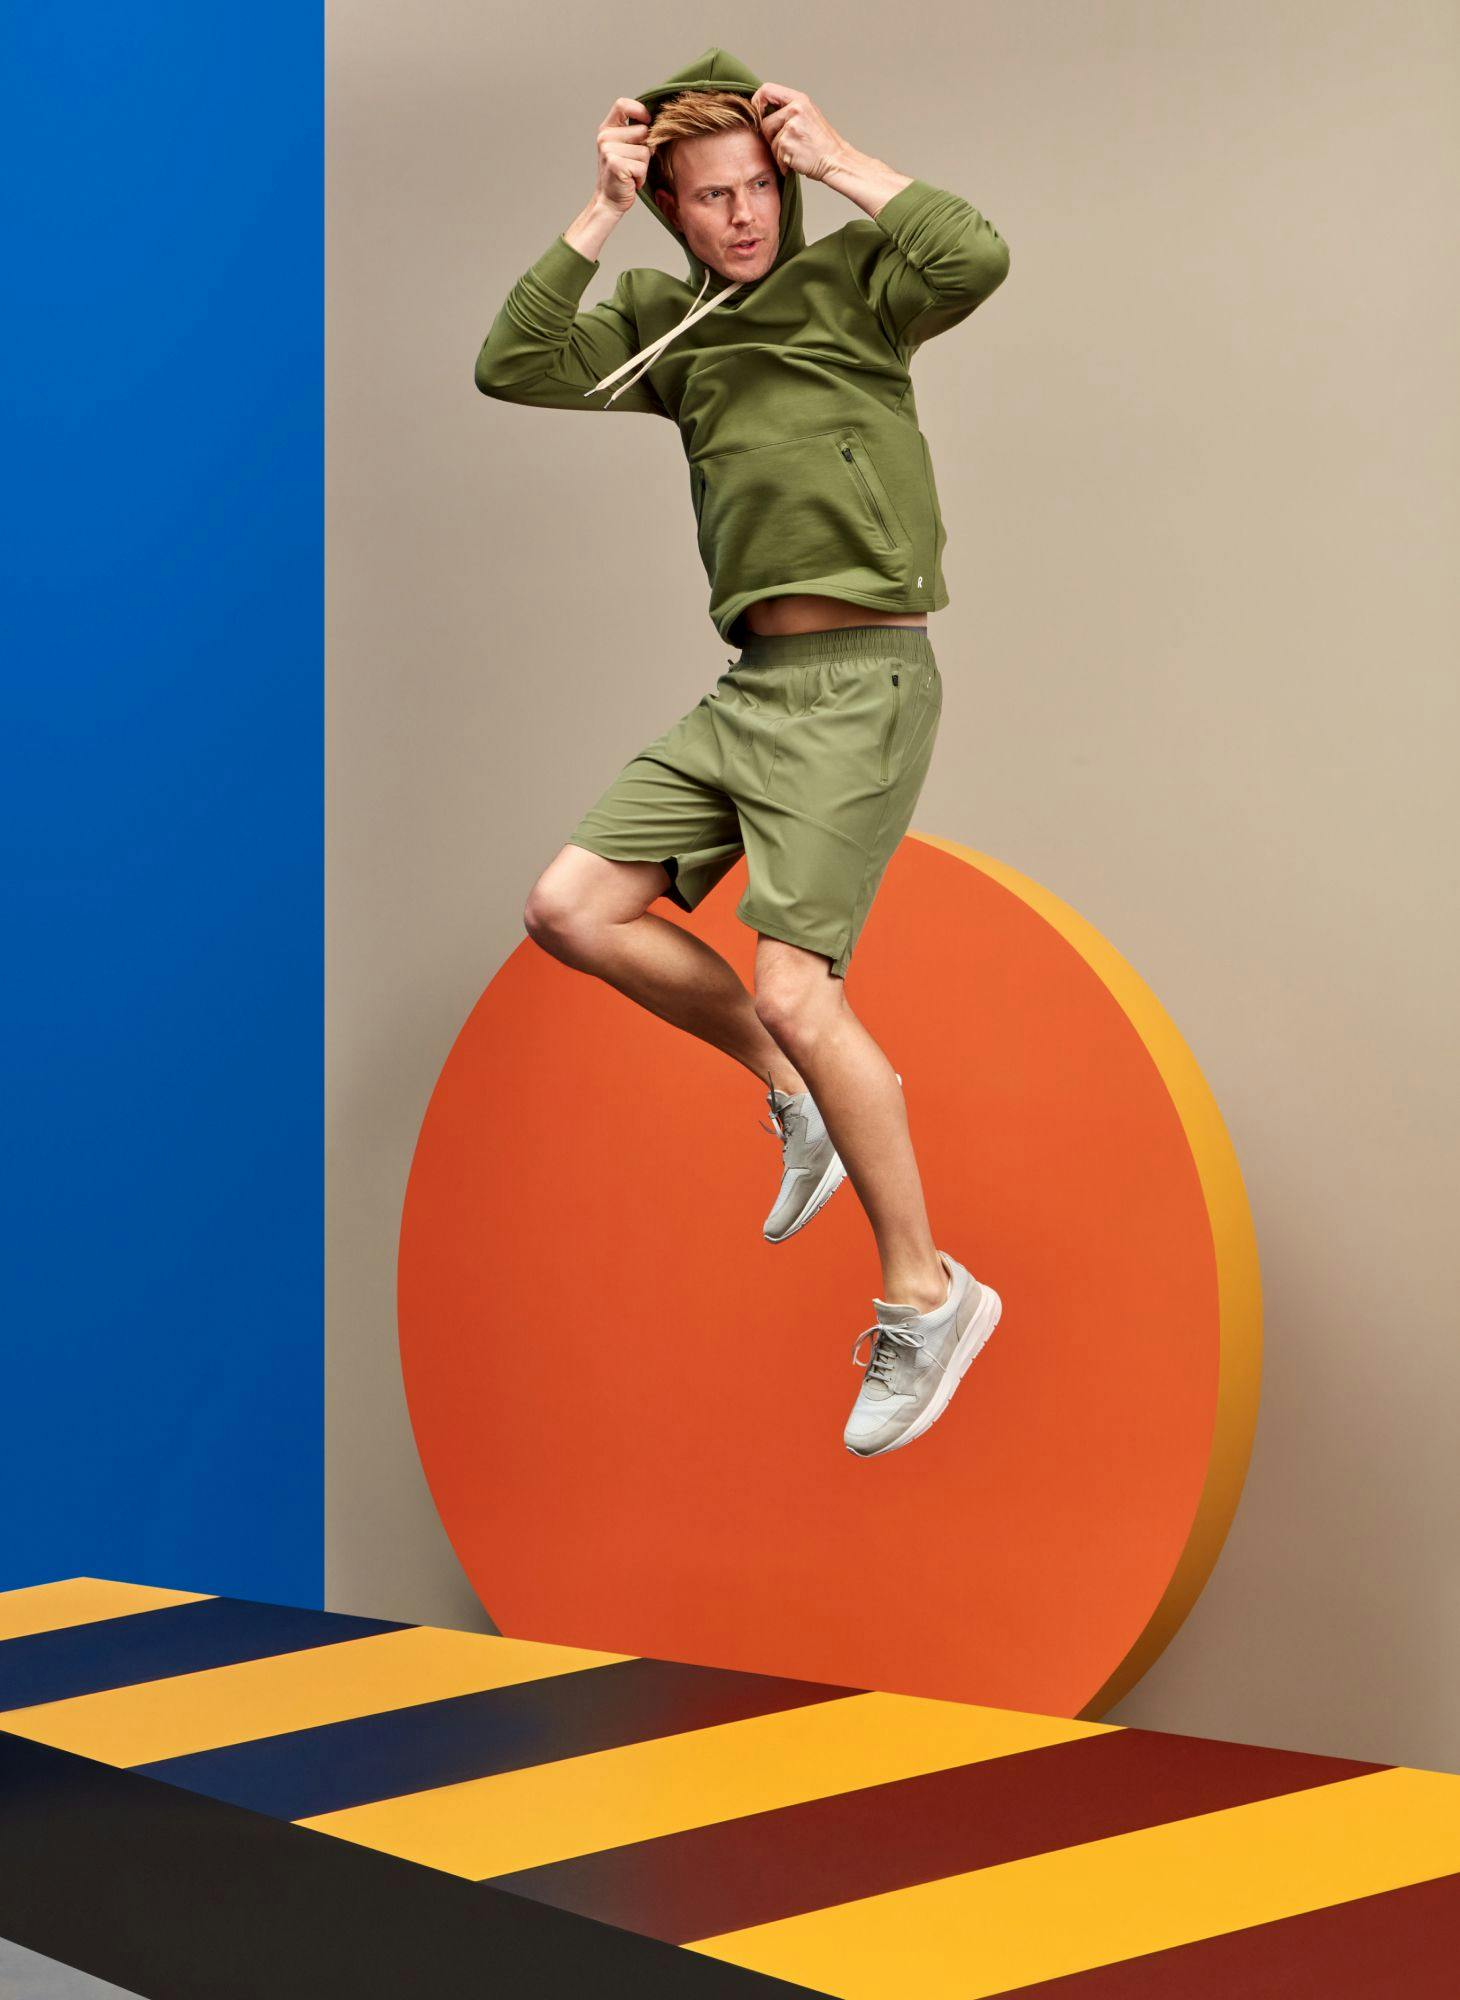 Man in green activewear jumping with an orange and blue background